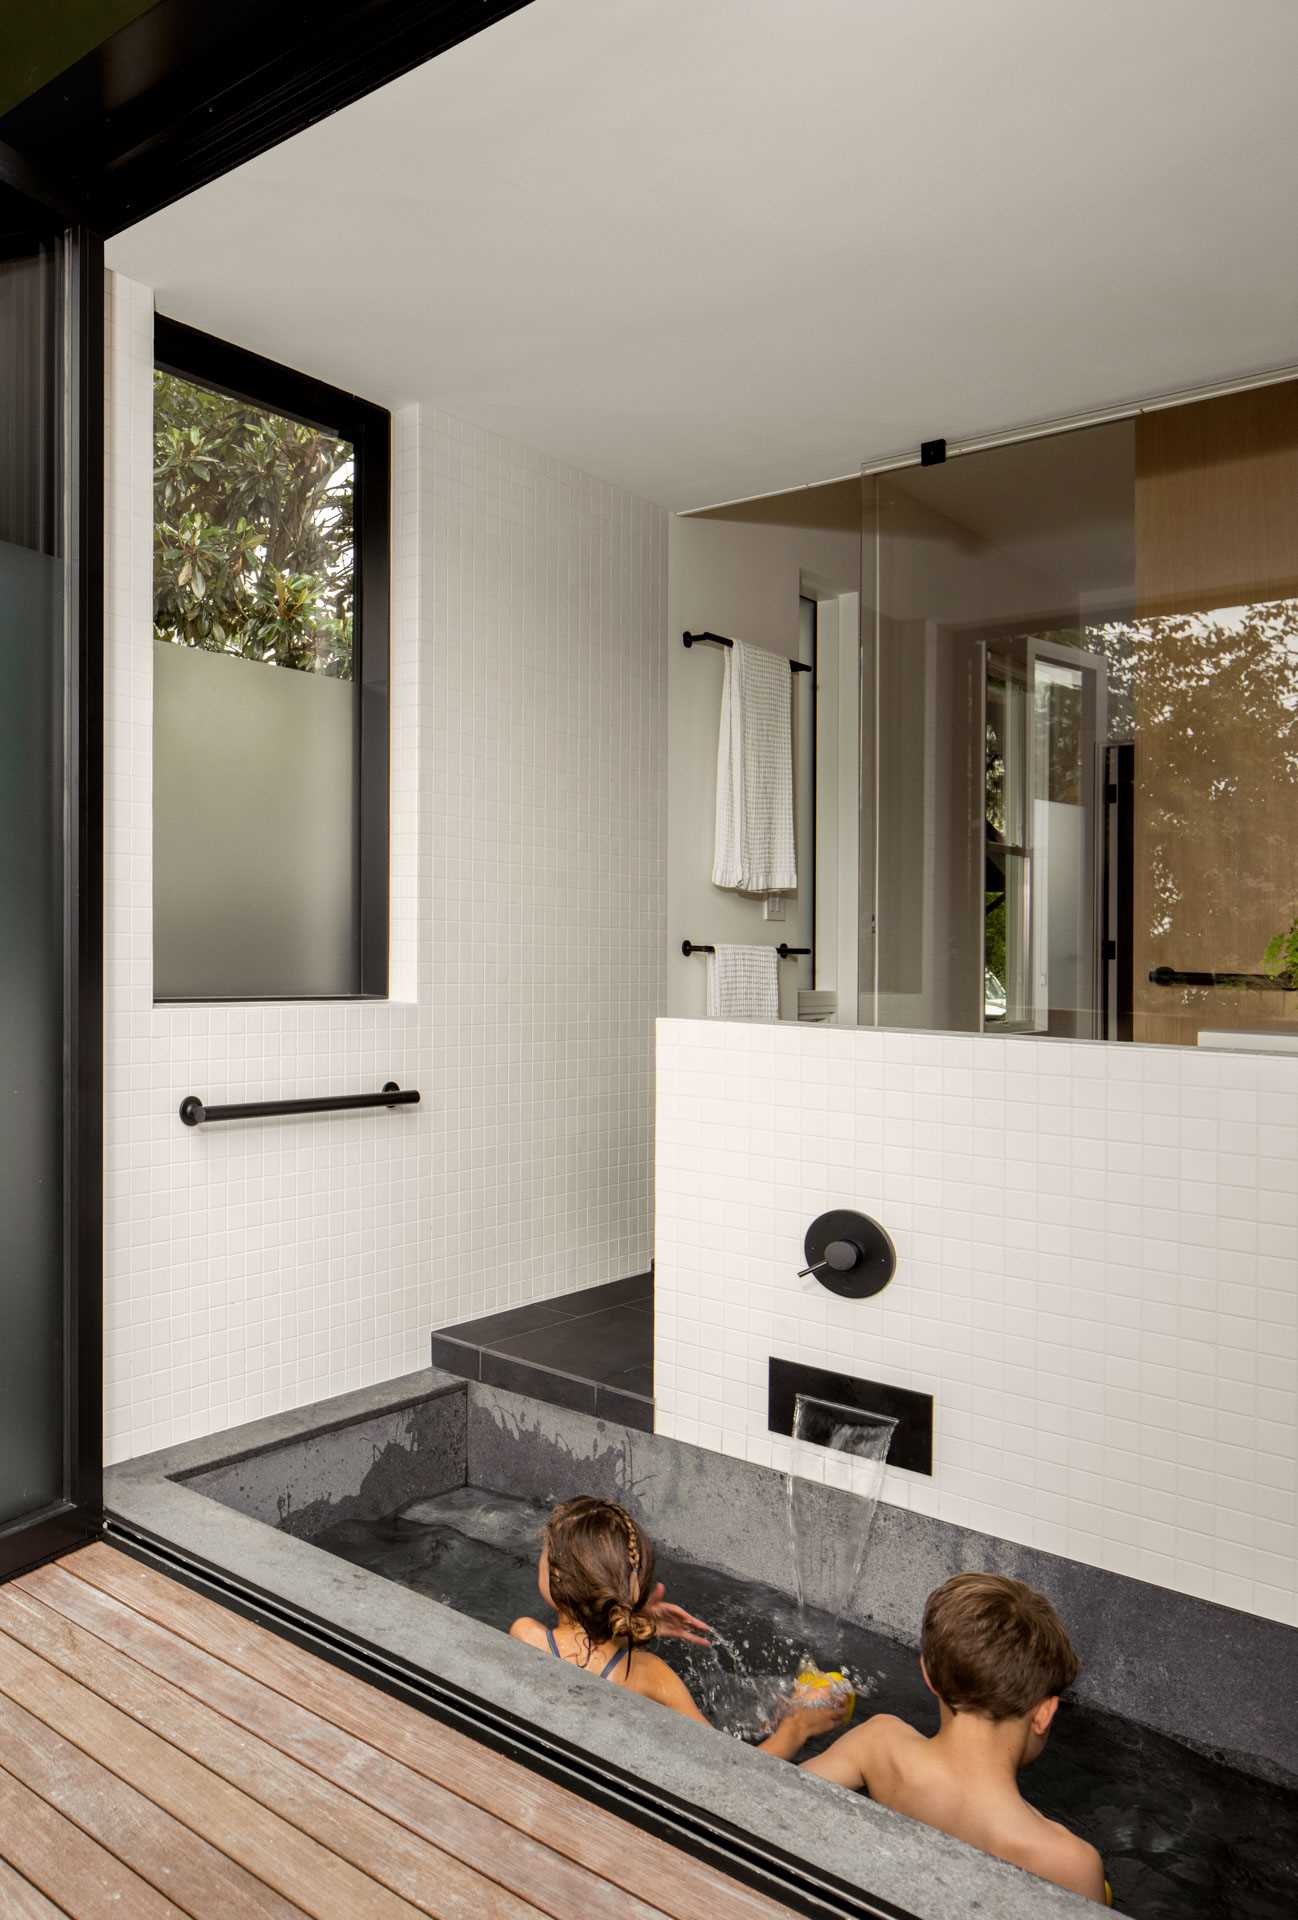 A modern family bathroom includes a traditional Japanese soaking tub (Ofuro), directly connecting to the outdoors via a folding glass door. A separate toilet room increases comfort and usability for the young family.